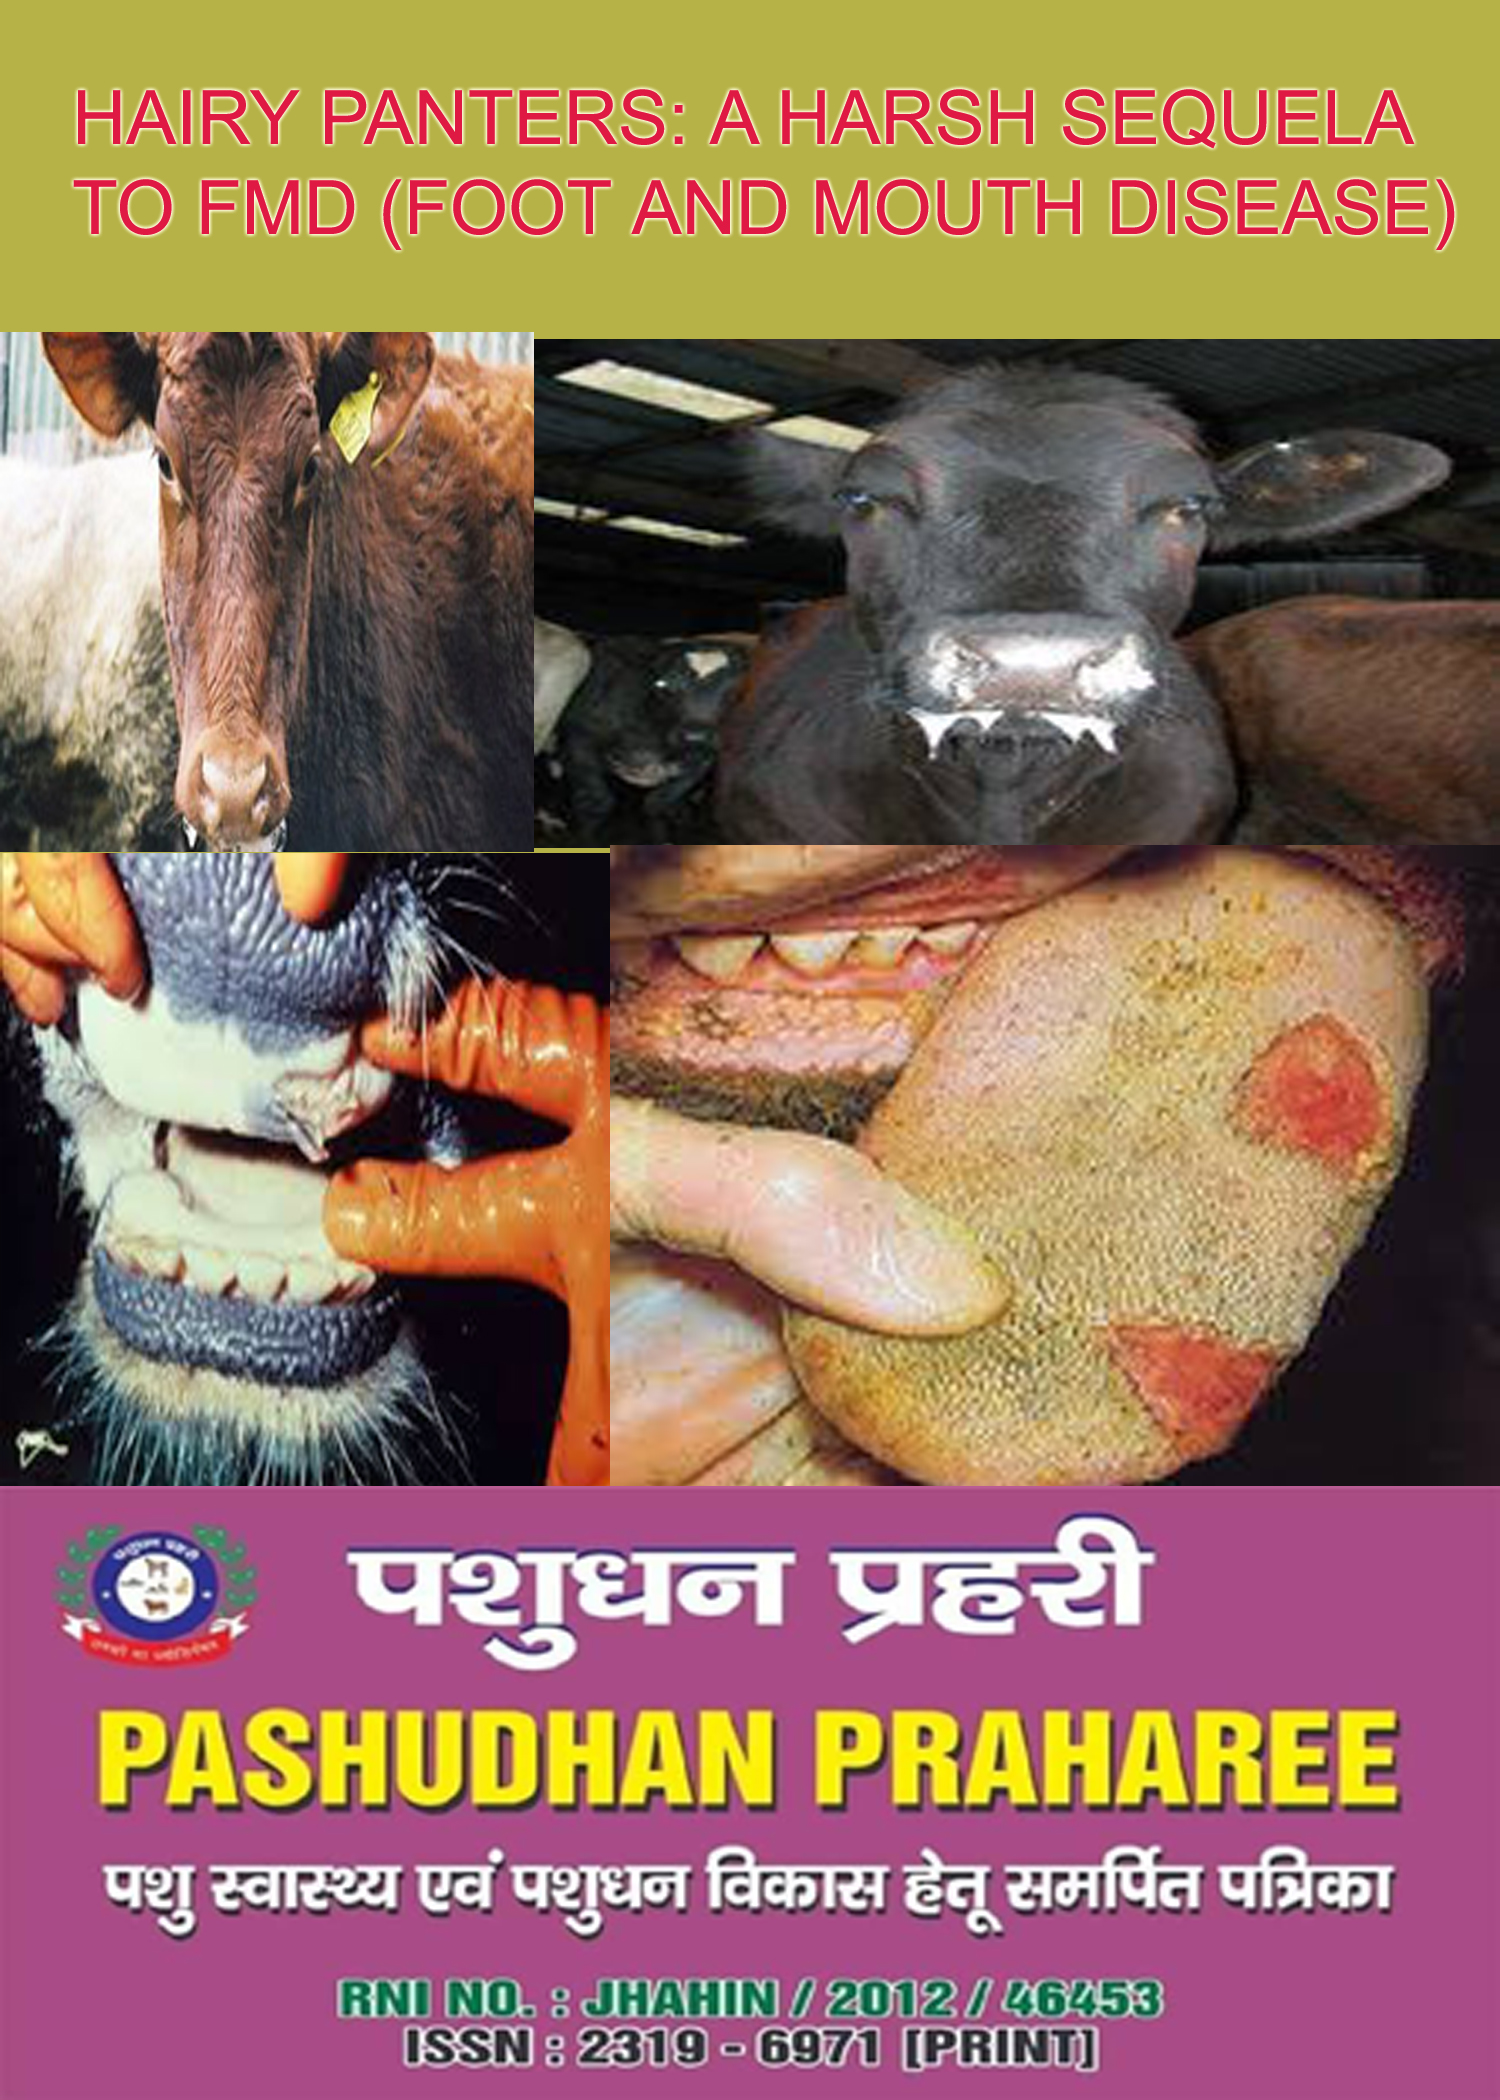 HAIRY PANTERS: A HARSH SEQUELA TO FMD (FOOT AND MOUTH DISEASE) – Pashudhan  praharee